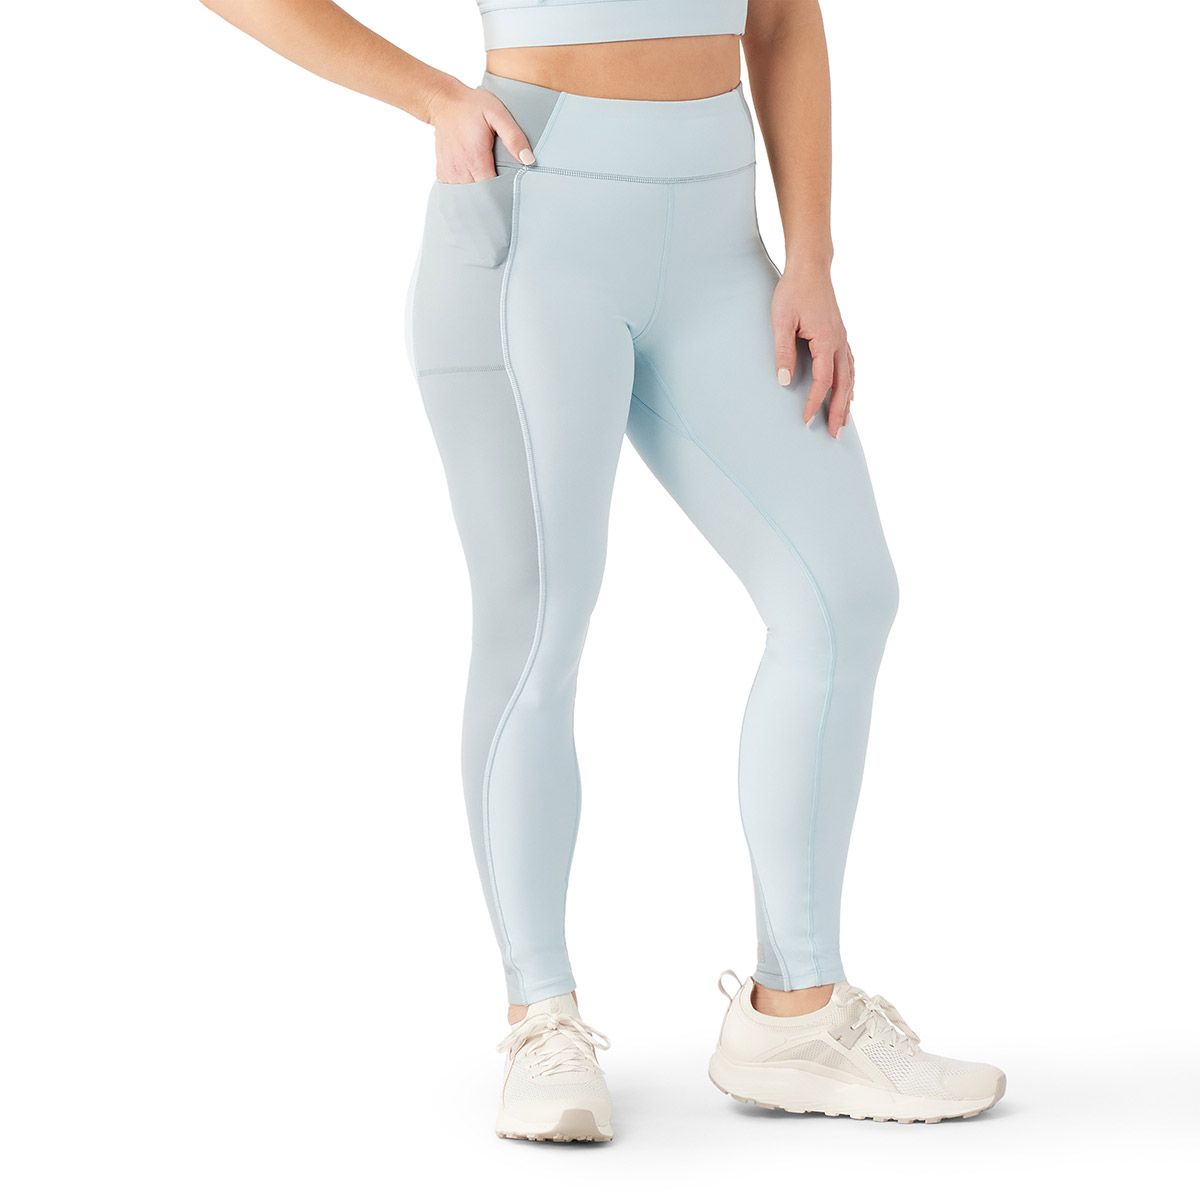 Nordstrom Canada shoppers love these lightweight leggings — and